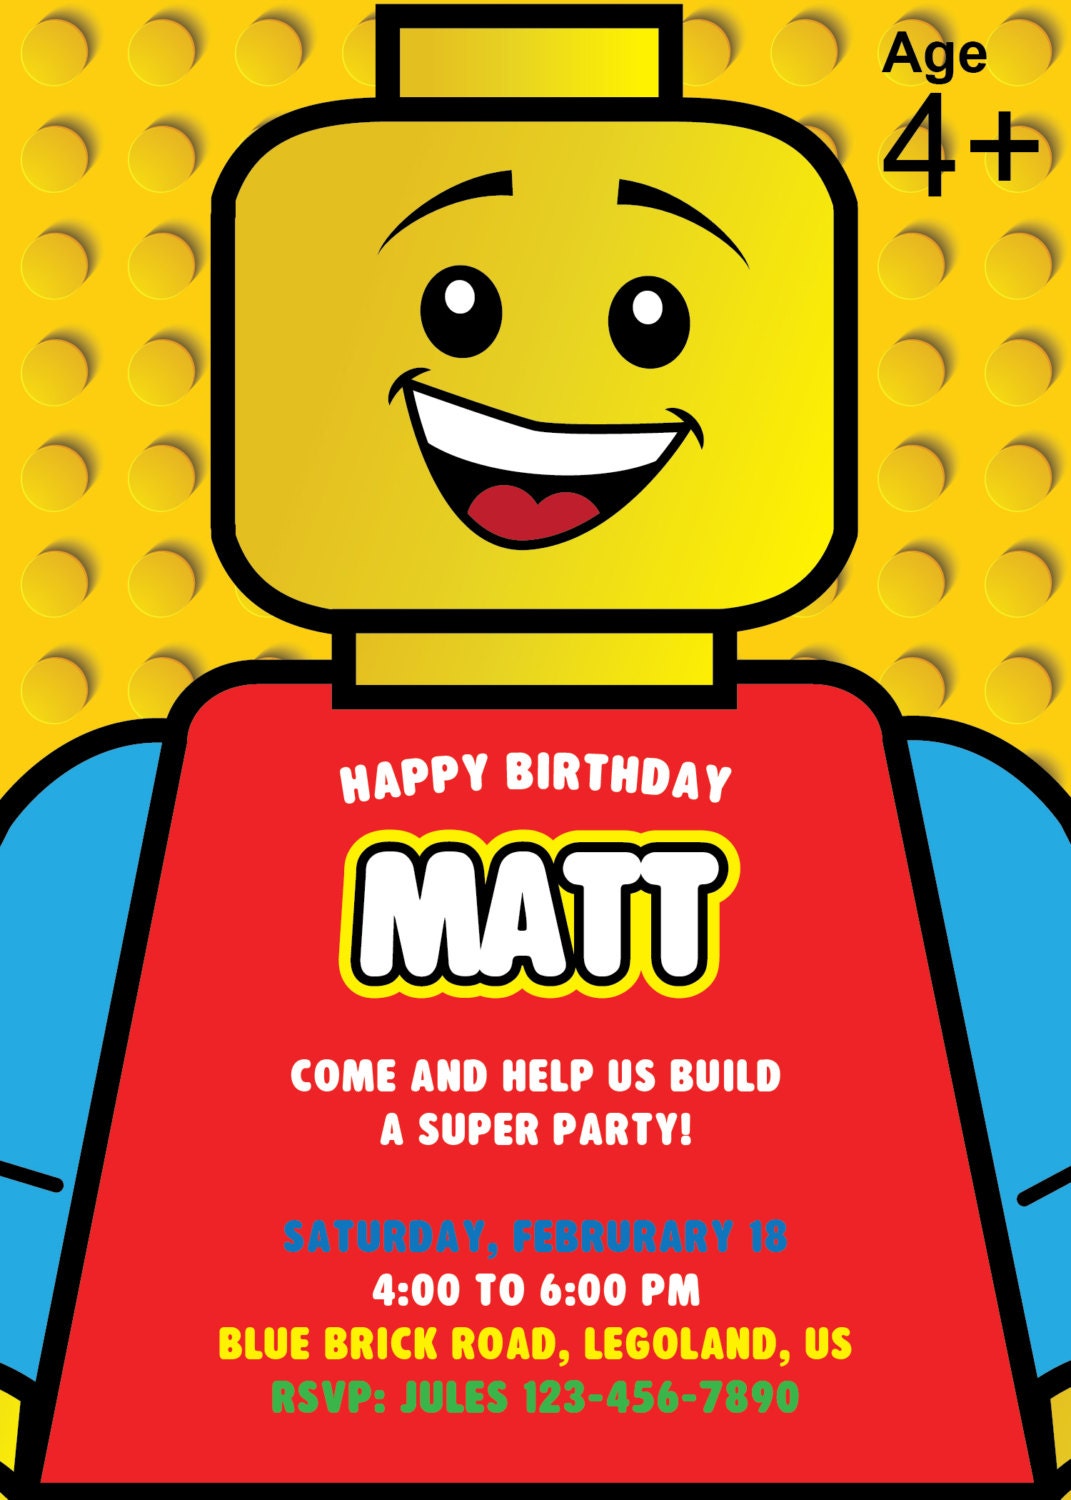 lego-invitation-template-free-download-of-lego-movie-party-invitation-by-socialbutterflies98-on